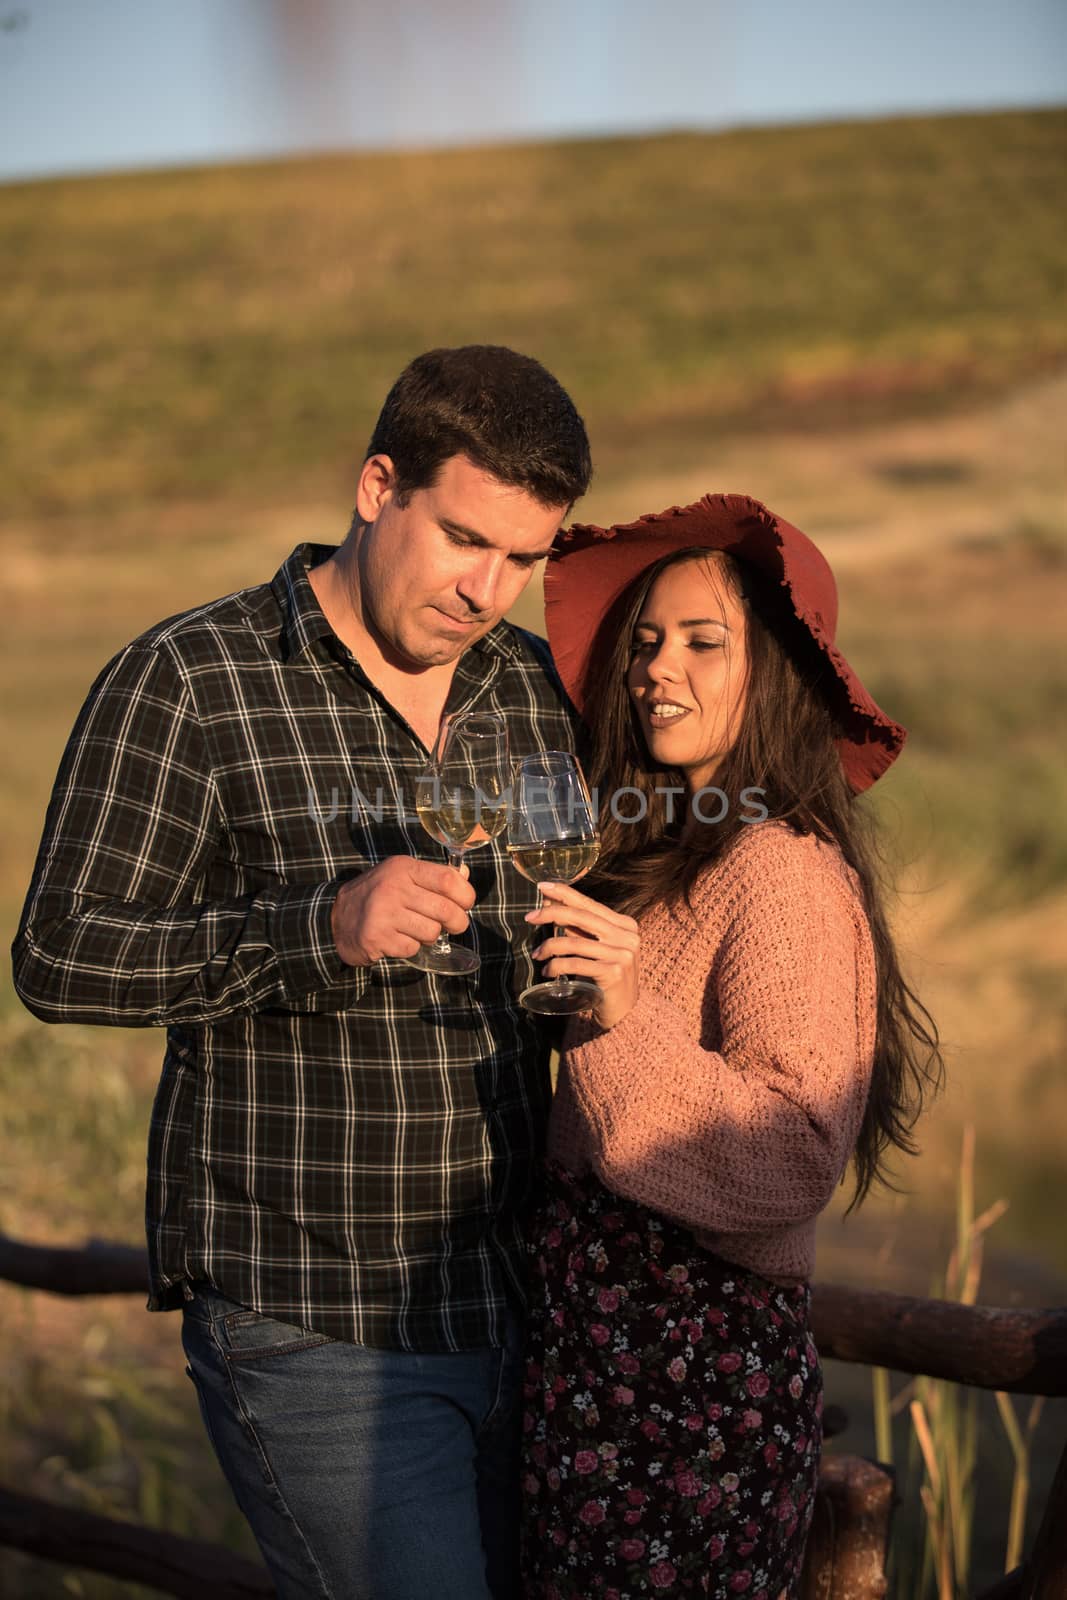 Romantic couple drinking wine at sunset in vineyard by DCStudio